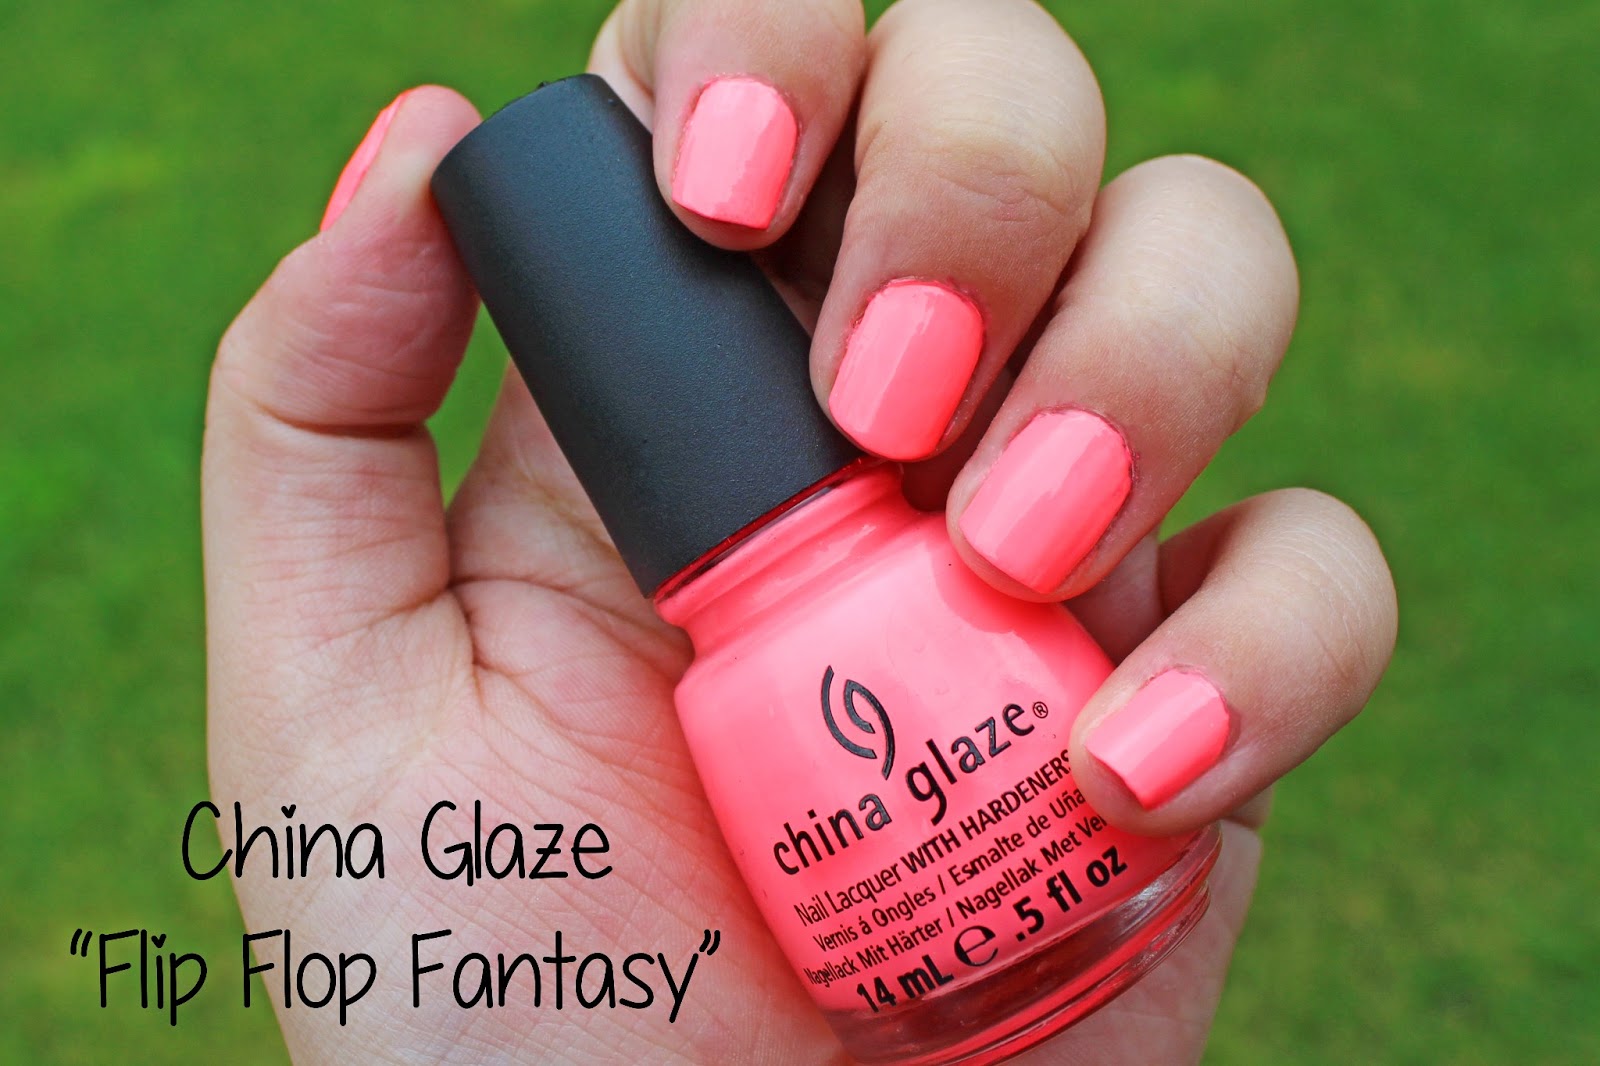 4. China Glaze Nail Lacquer in "Flip Flop Fantasy" - wide 9